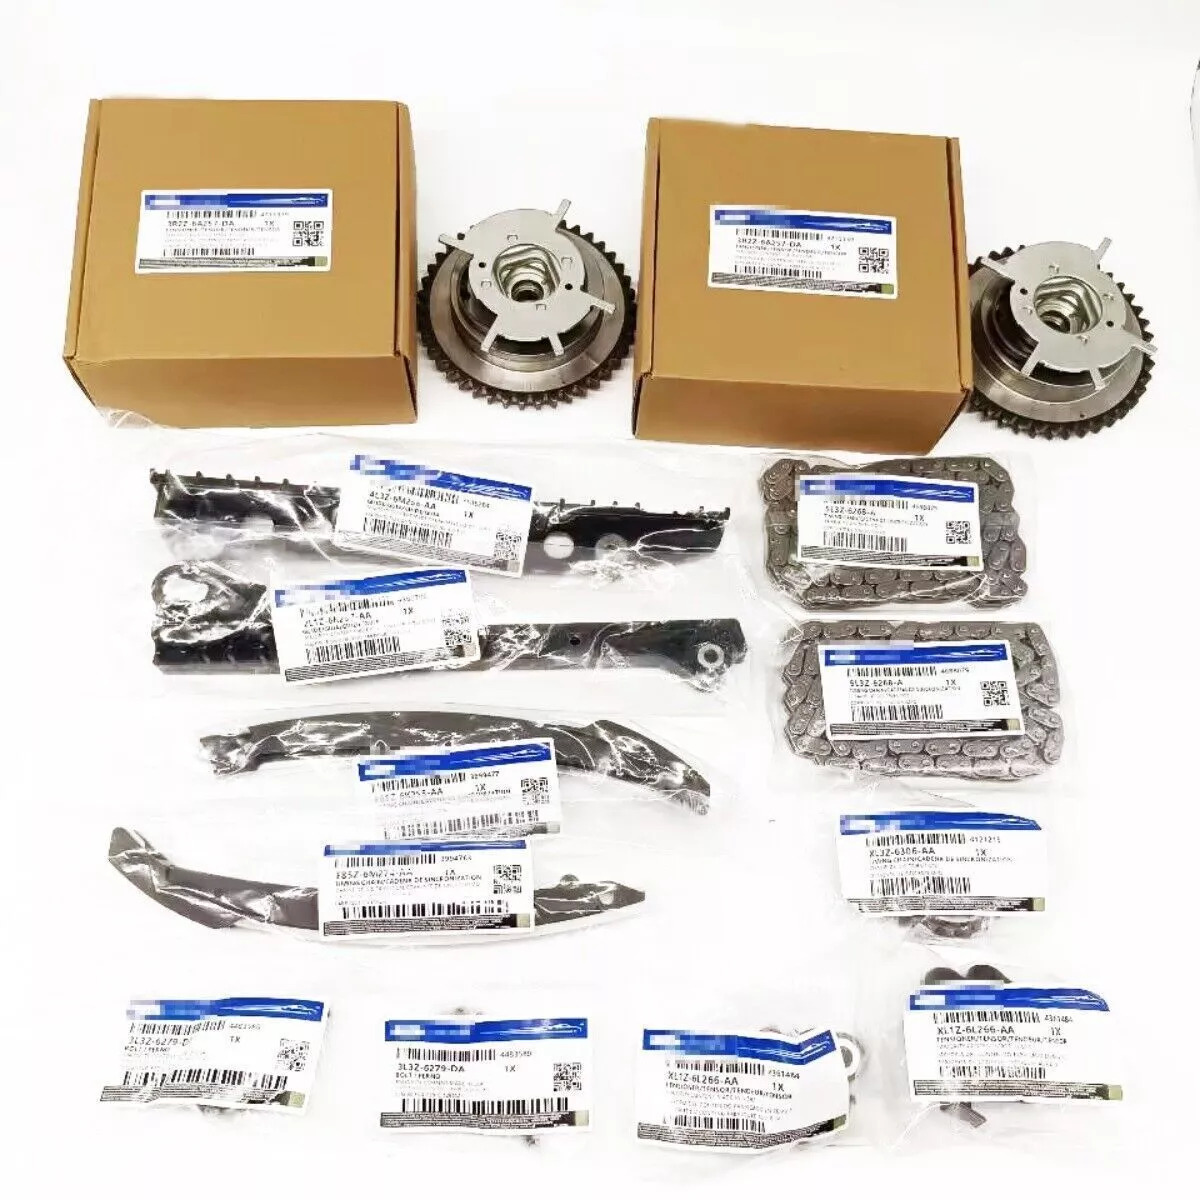 TIMING CHAIN KIT 13 PIECES NEW FORD F-250-550 5.4L V8 24V OHV For 2000-2010 US